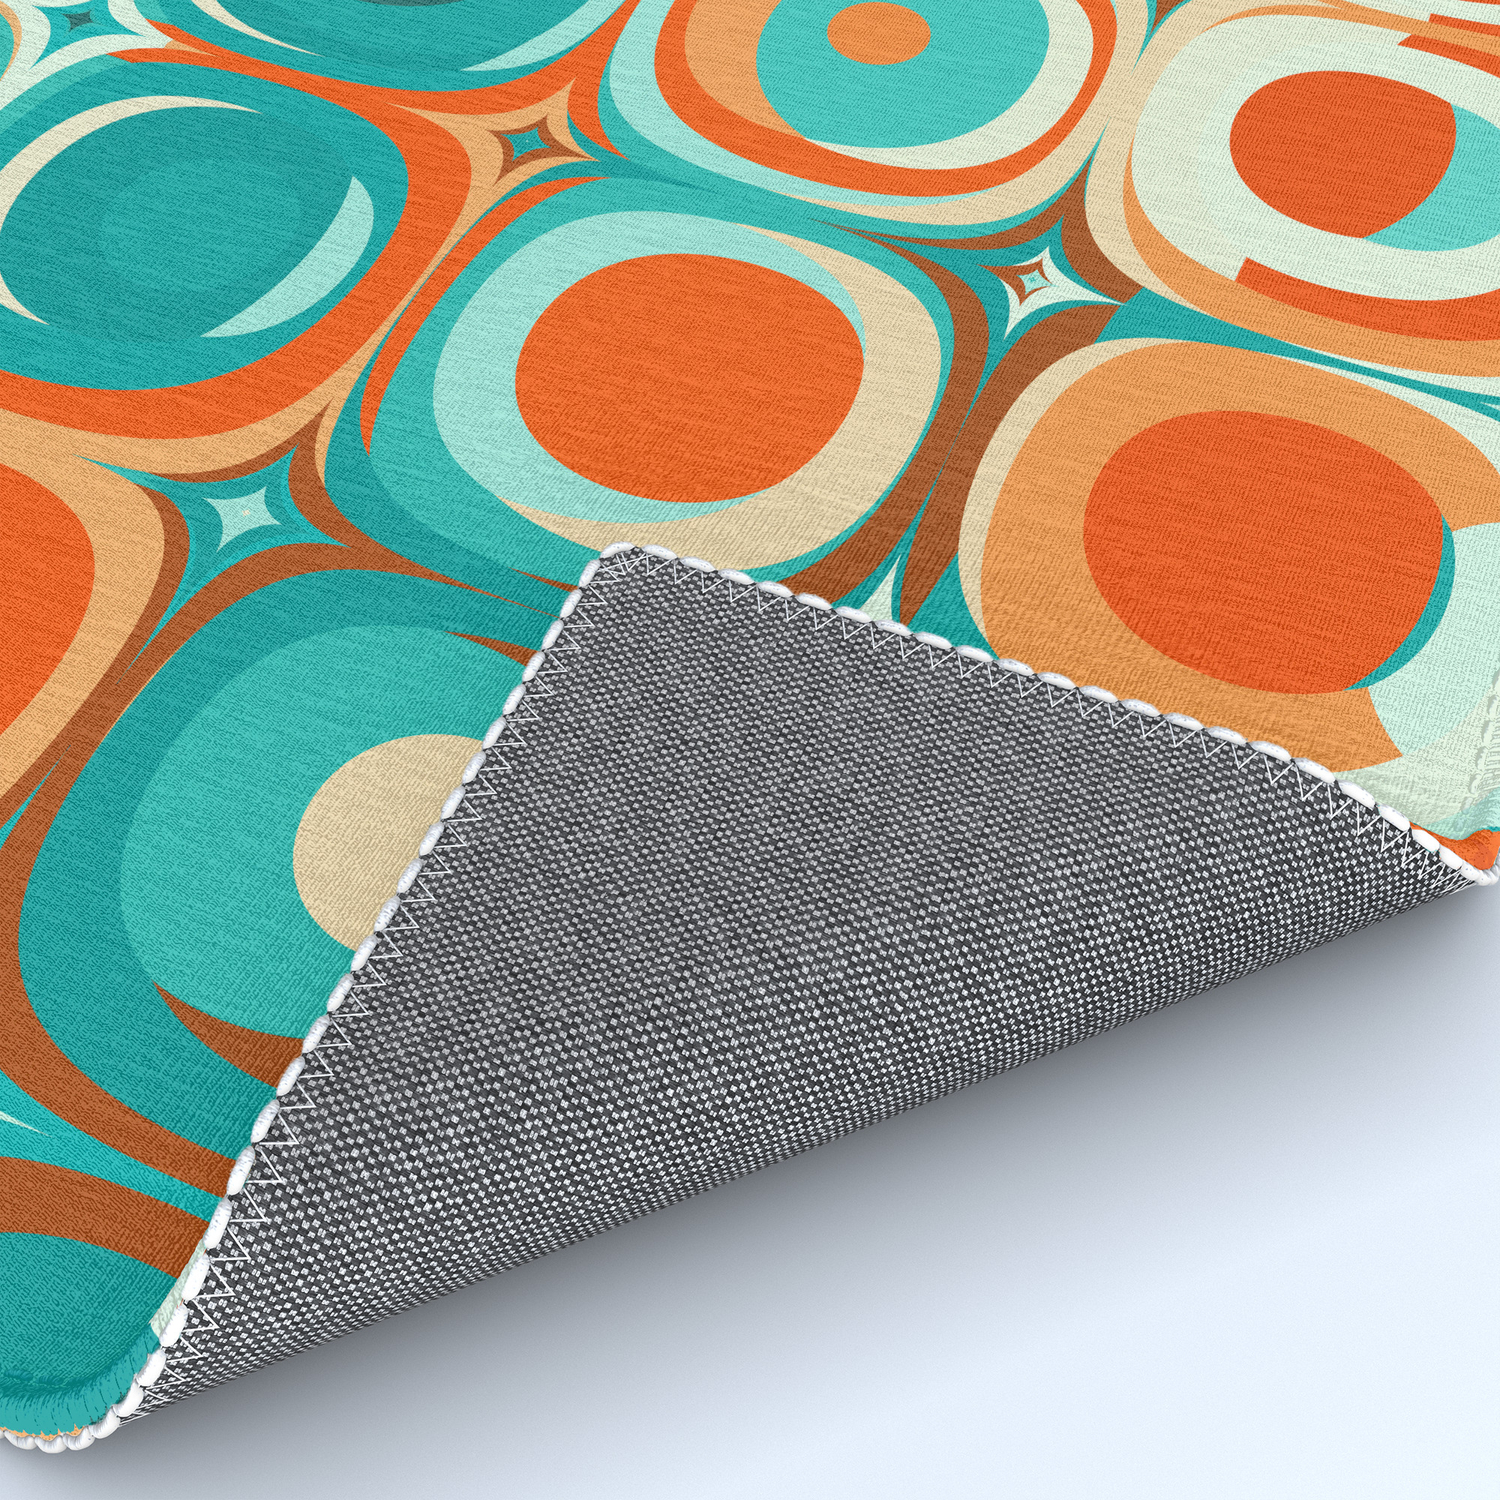 Orange And Turquoise Dots Rug By Kelly, Orange And Turquoise Rug